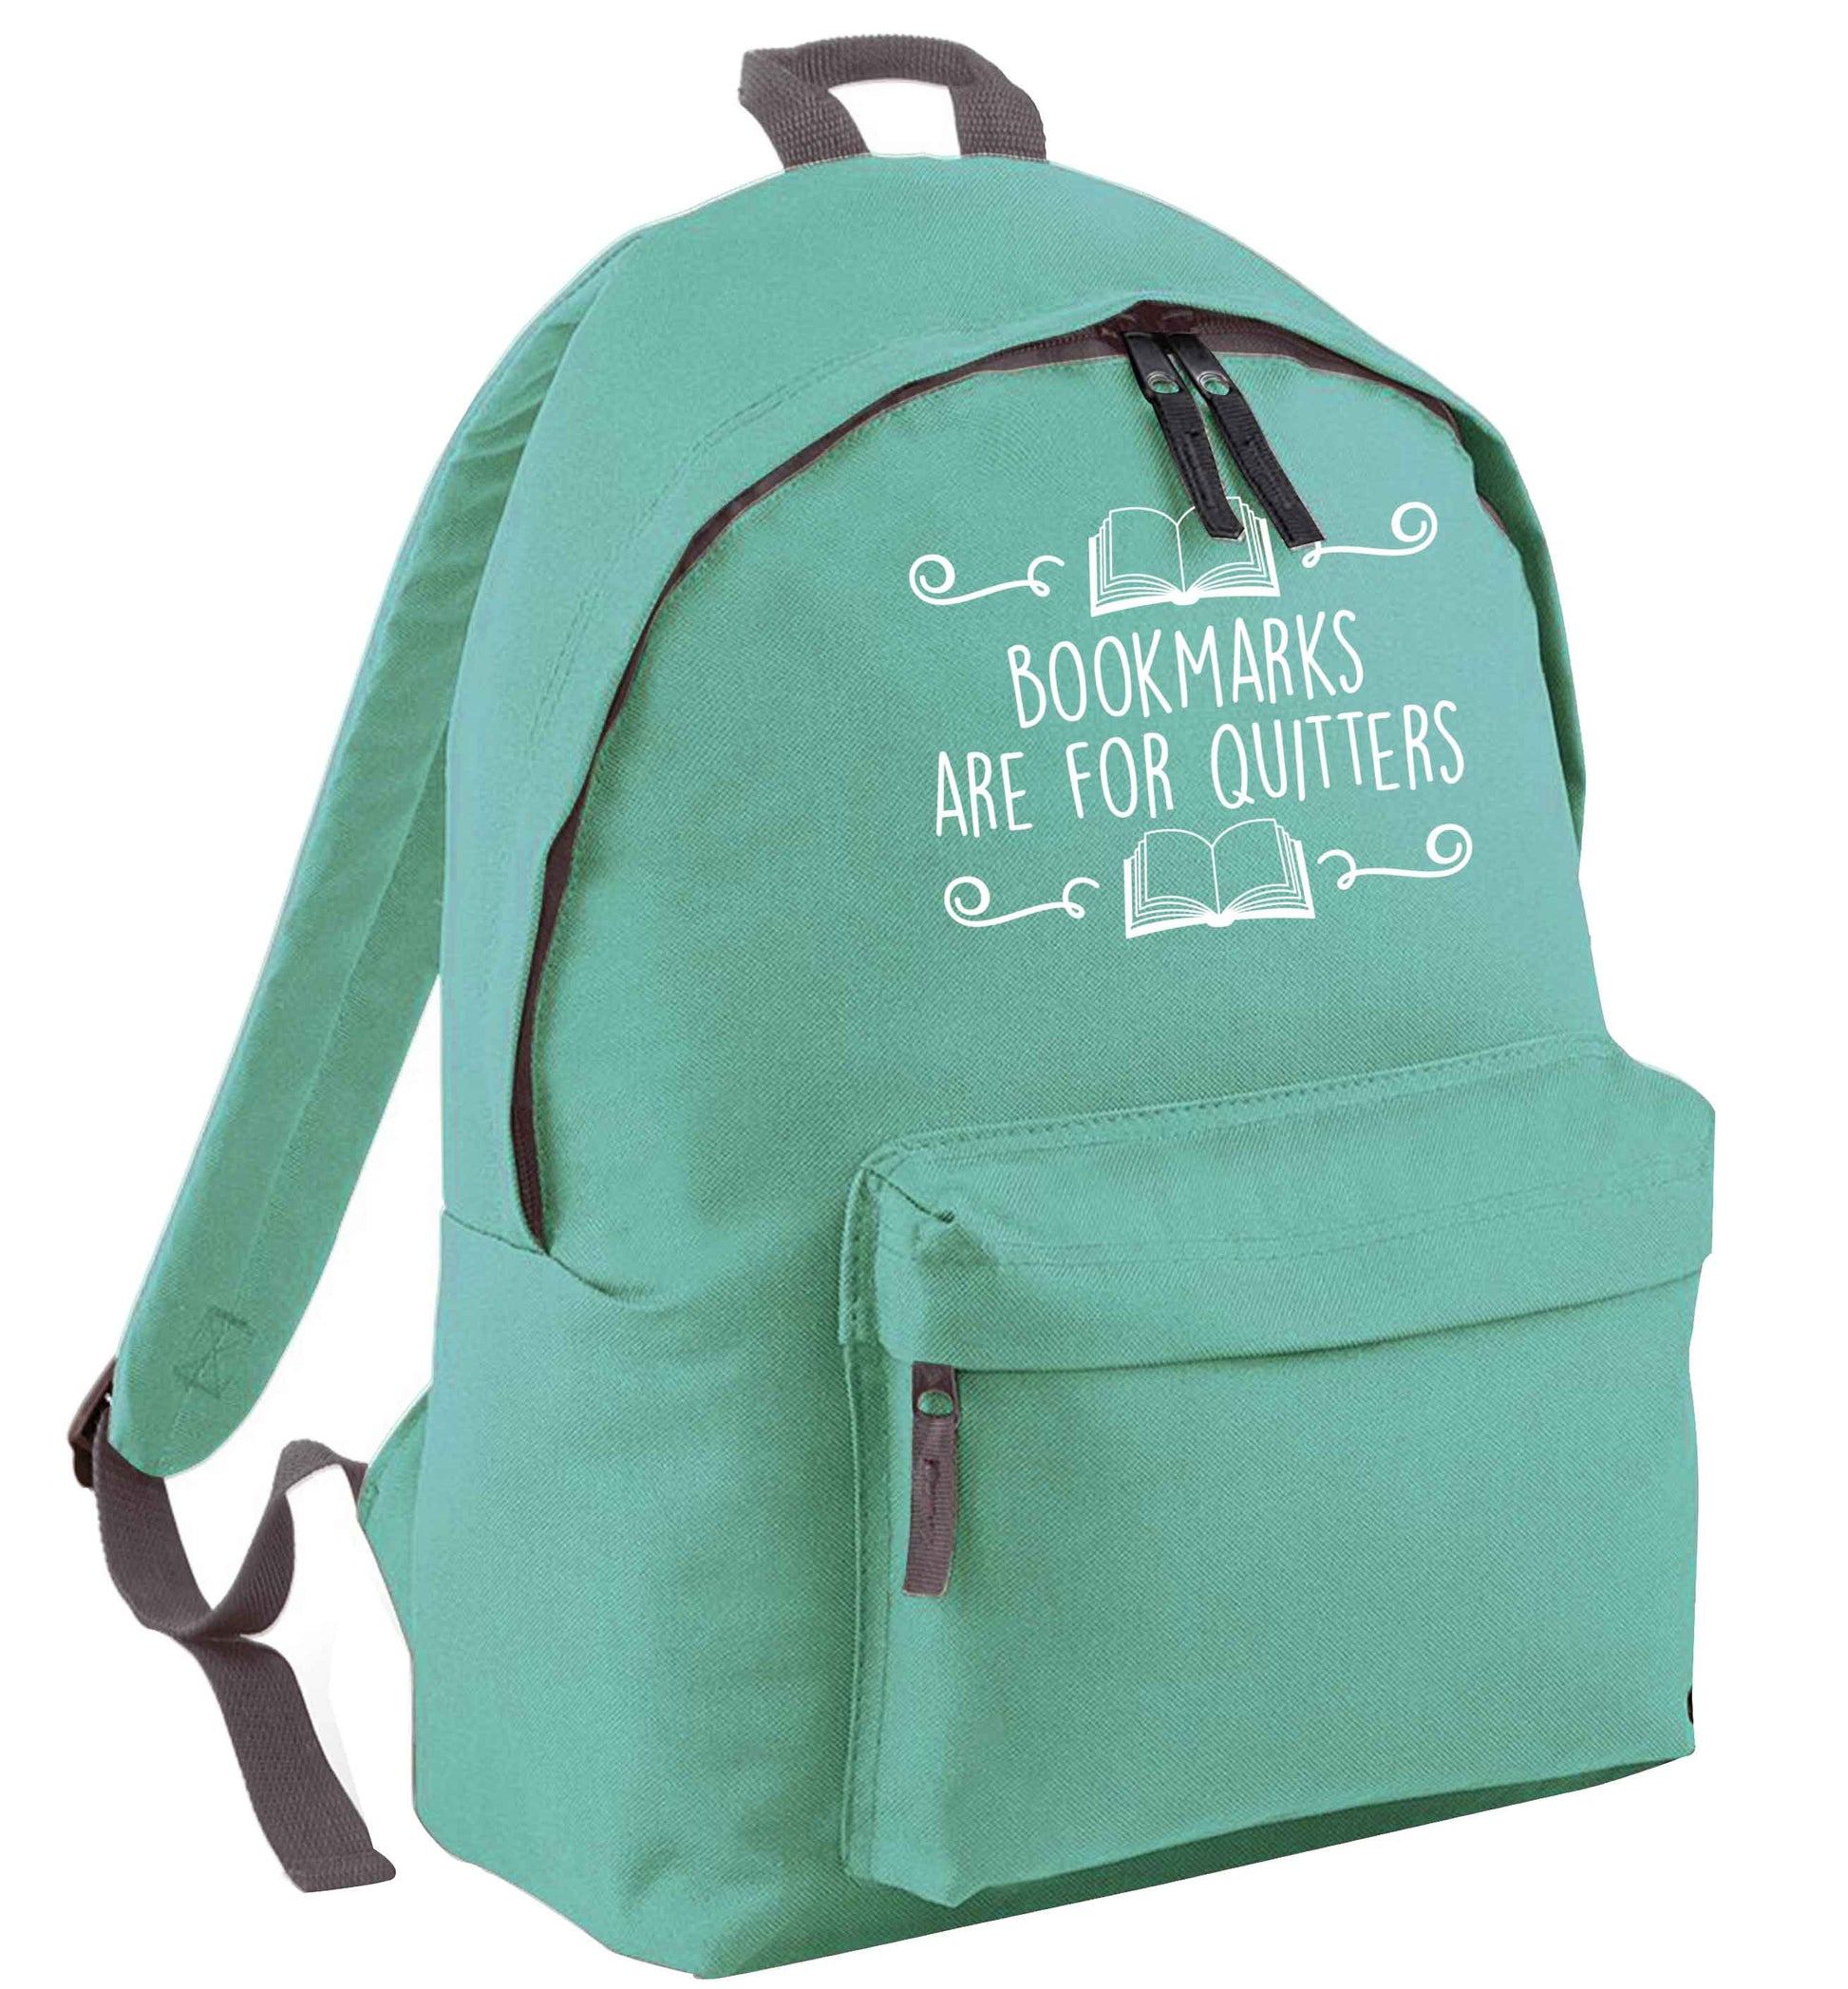 Bookmarks are for quitters mint adults backpack